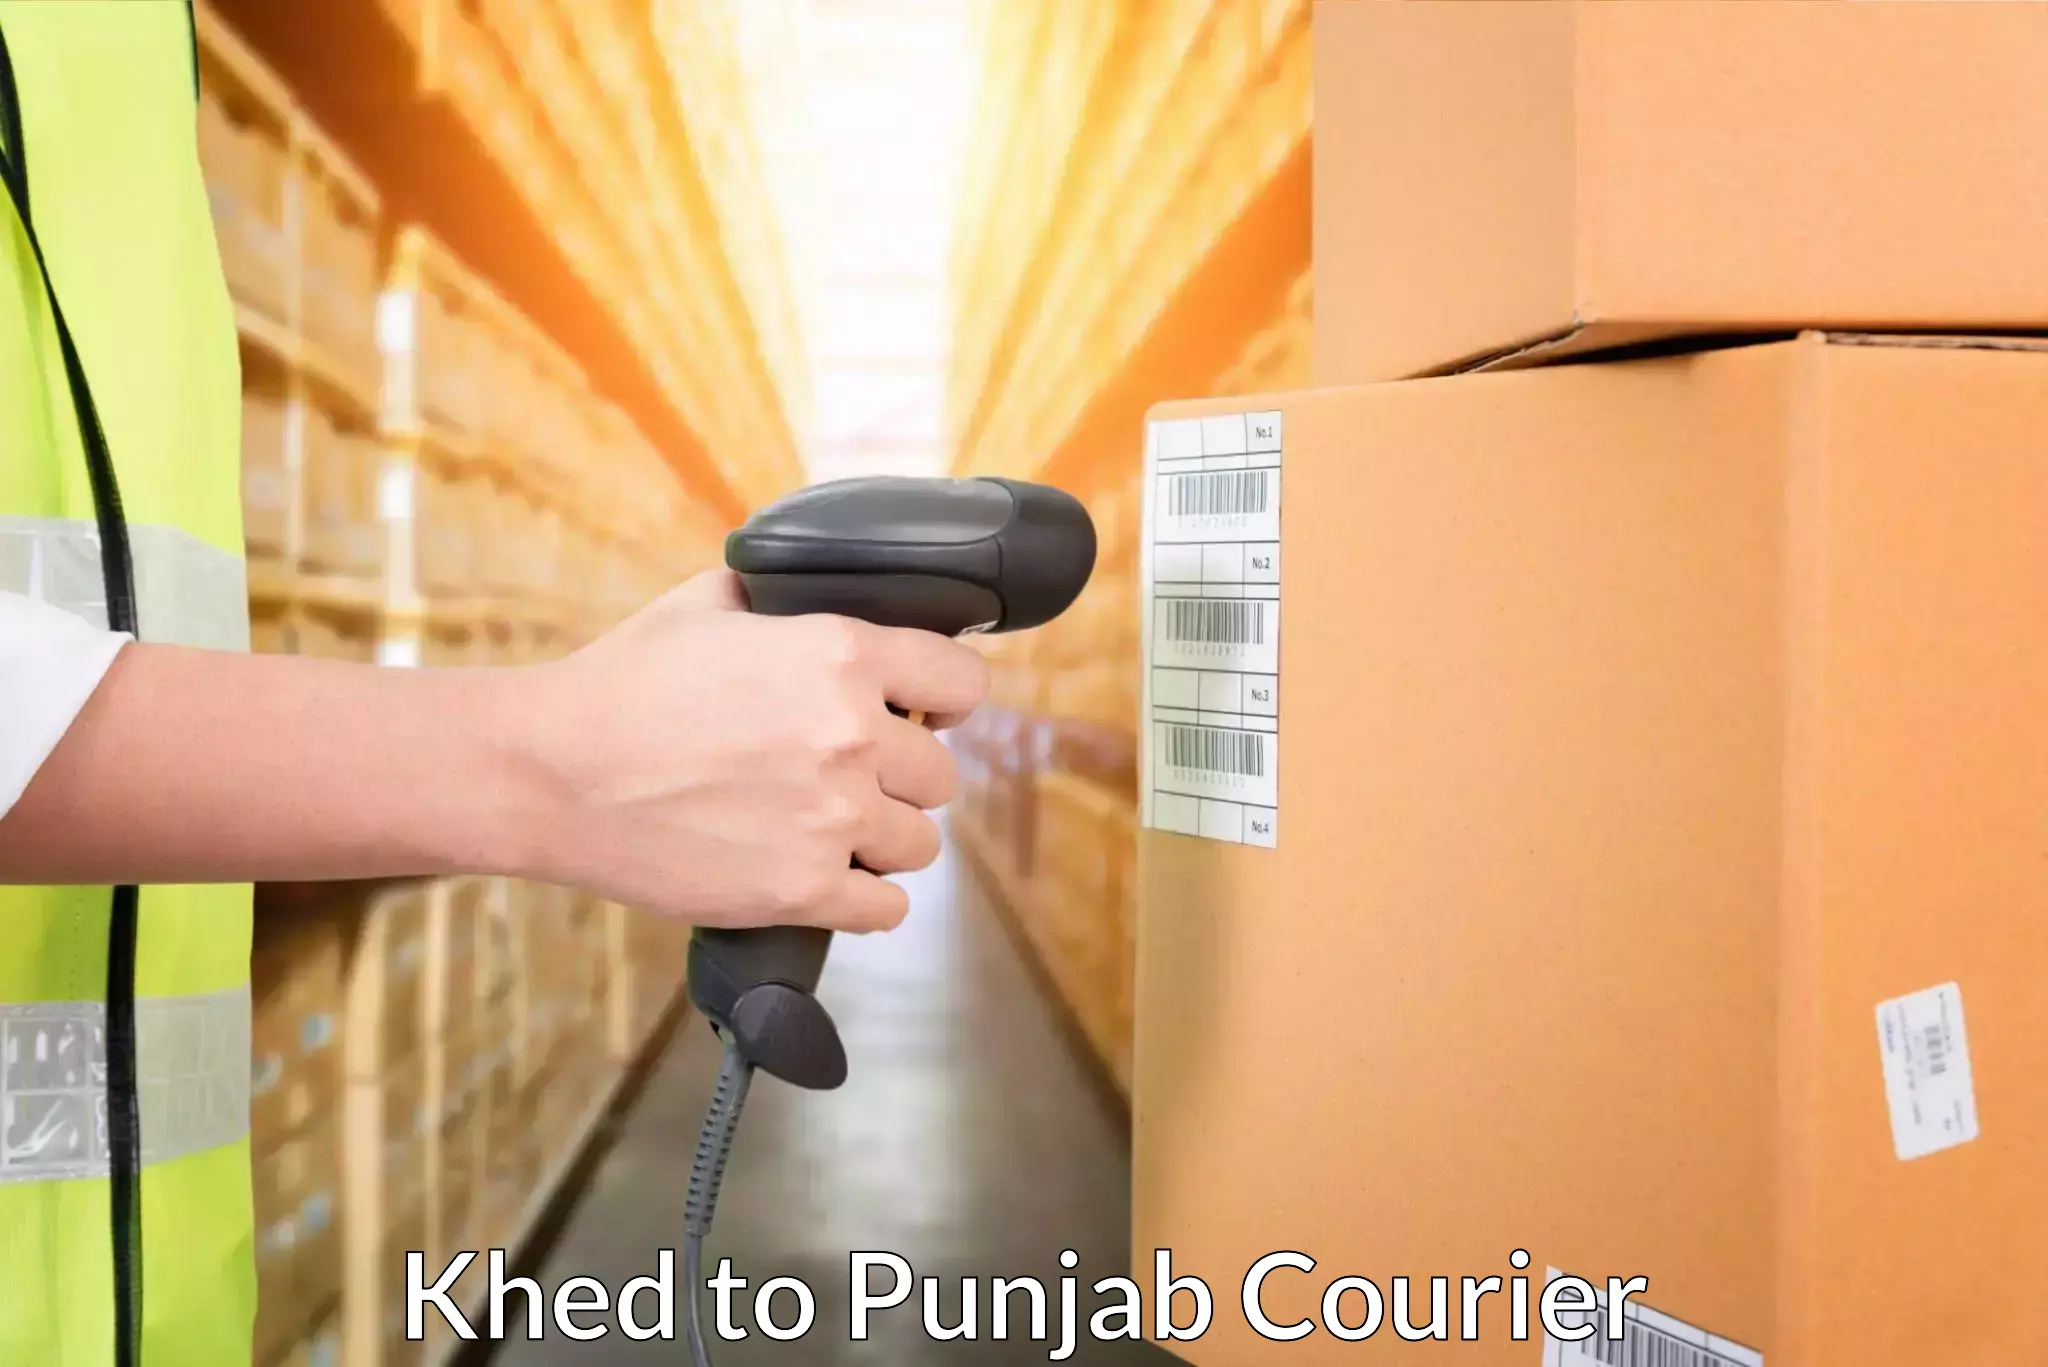 Courier service comparison Khed to Begowal